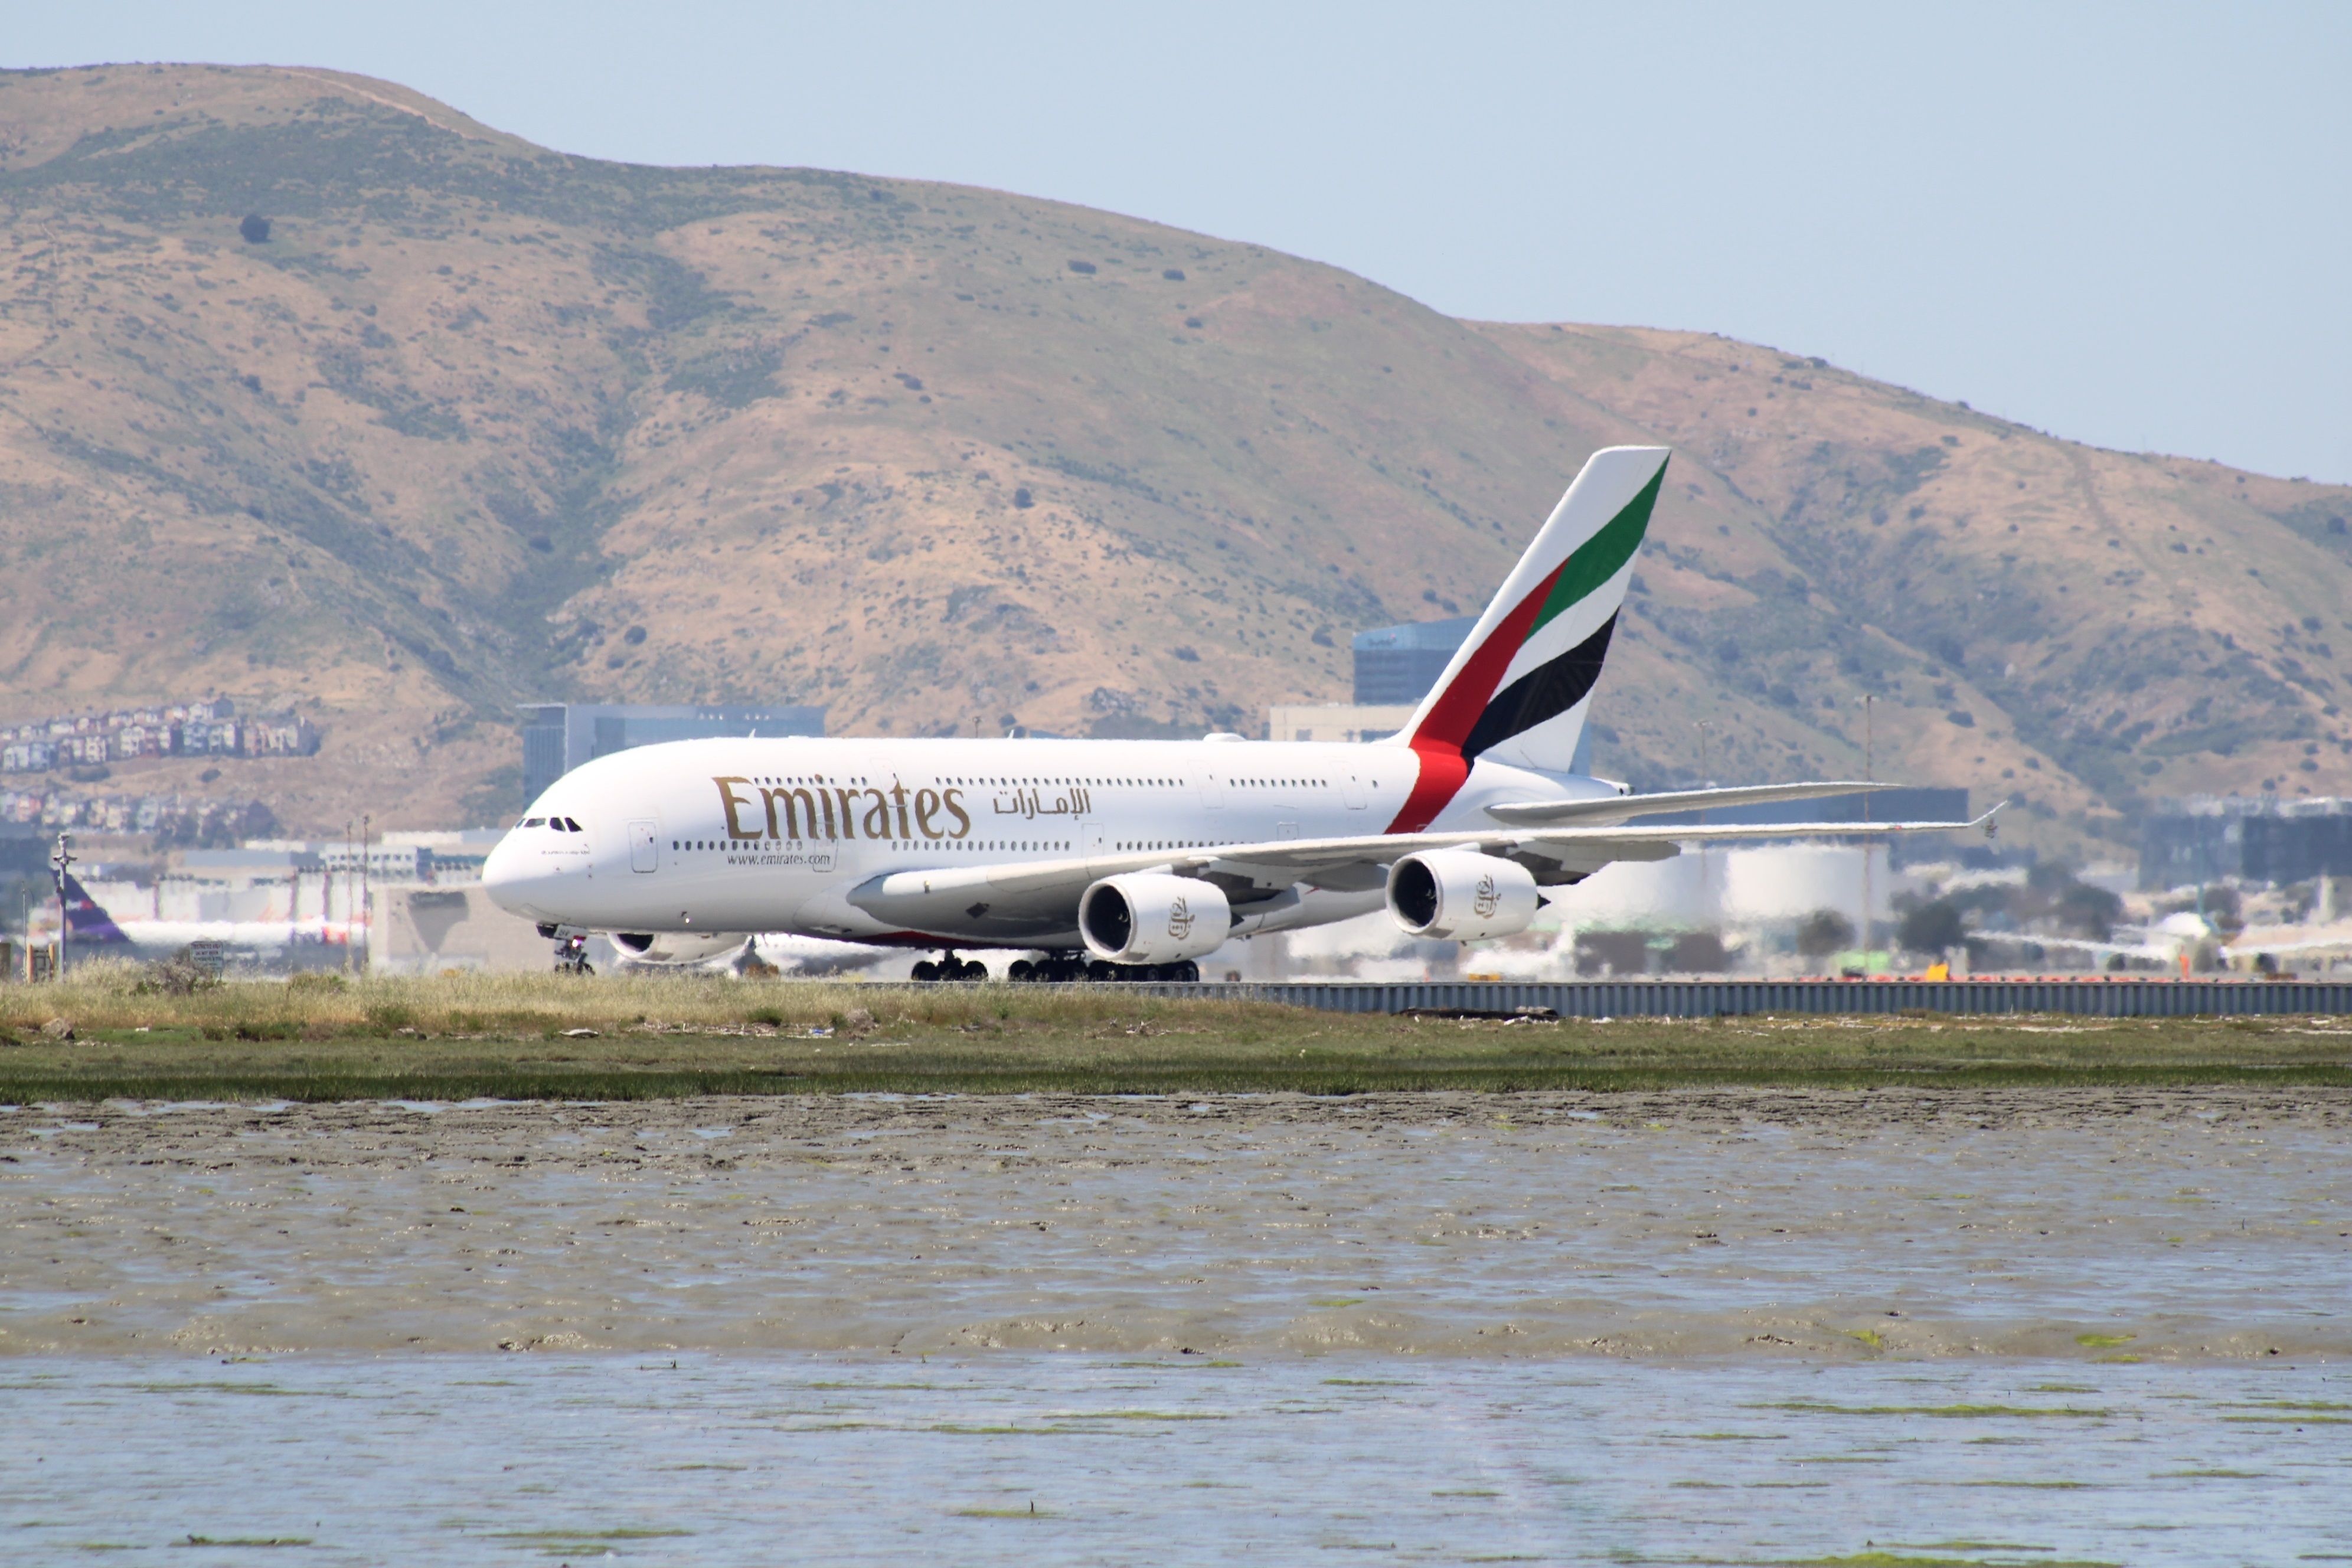 Emirates Airbus A380 on the San Francisco airport apron.